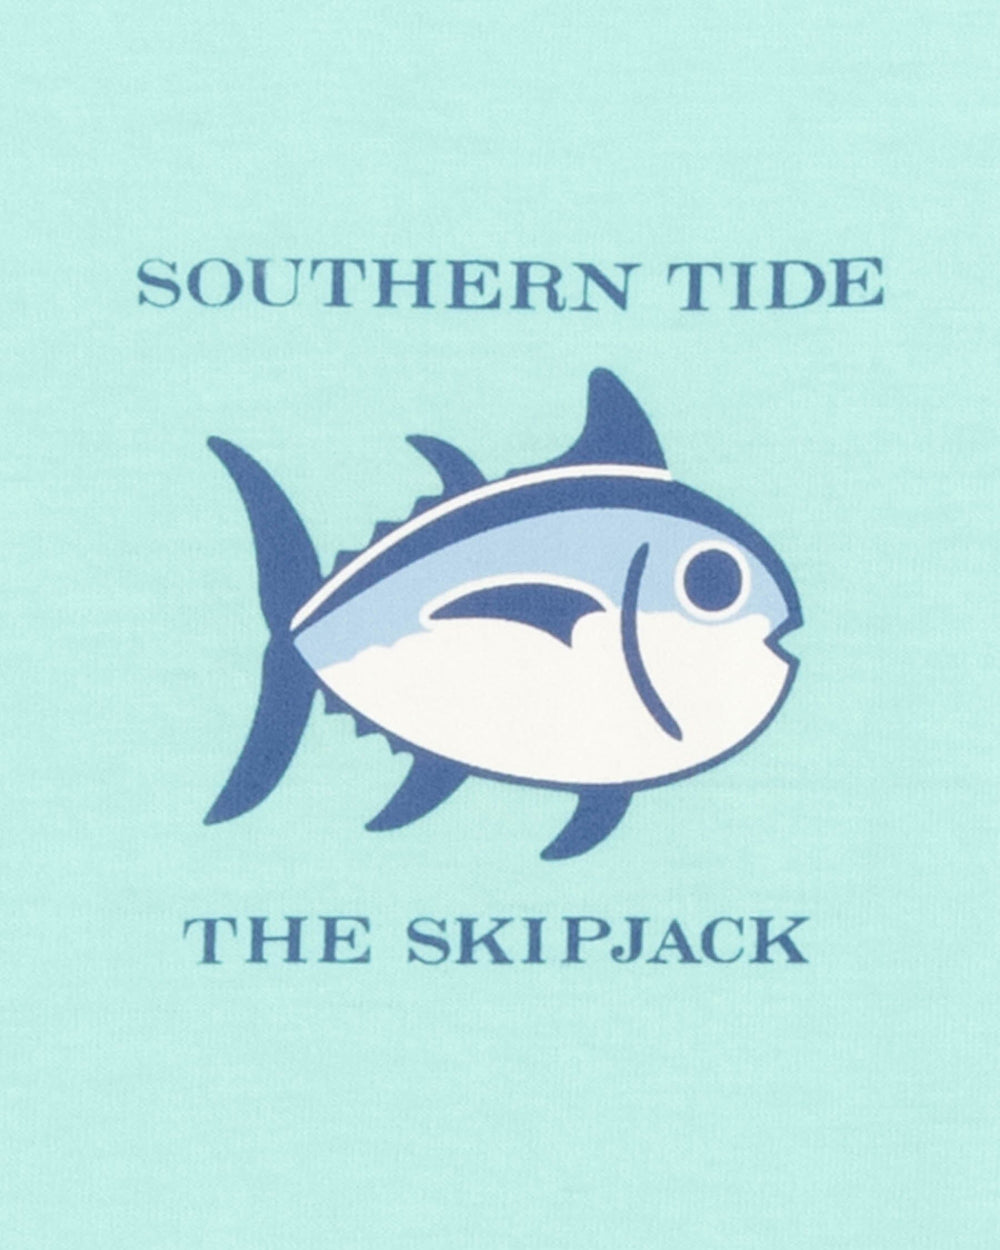 The detail view of the Southern Tide Long Sleeve Original Skipjack T-Shirt by Southern Tide - Baltic Teal